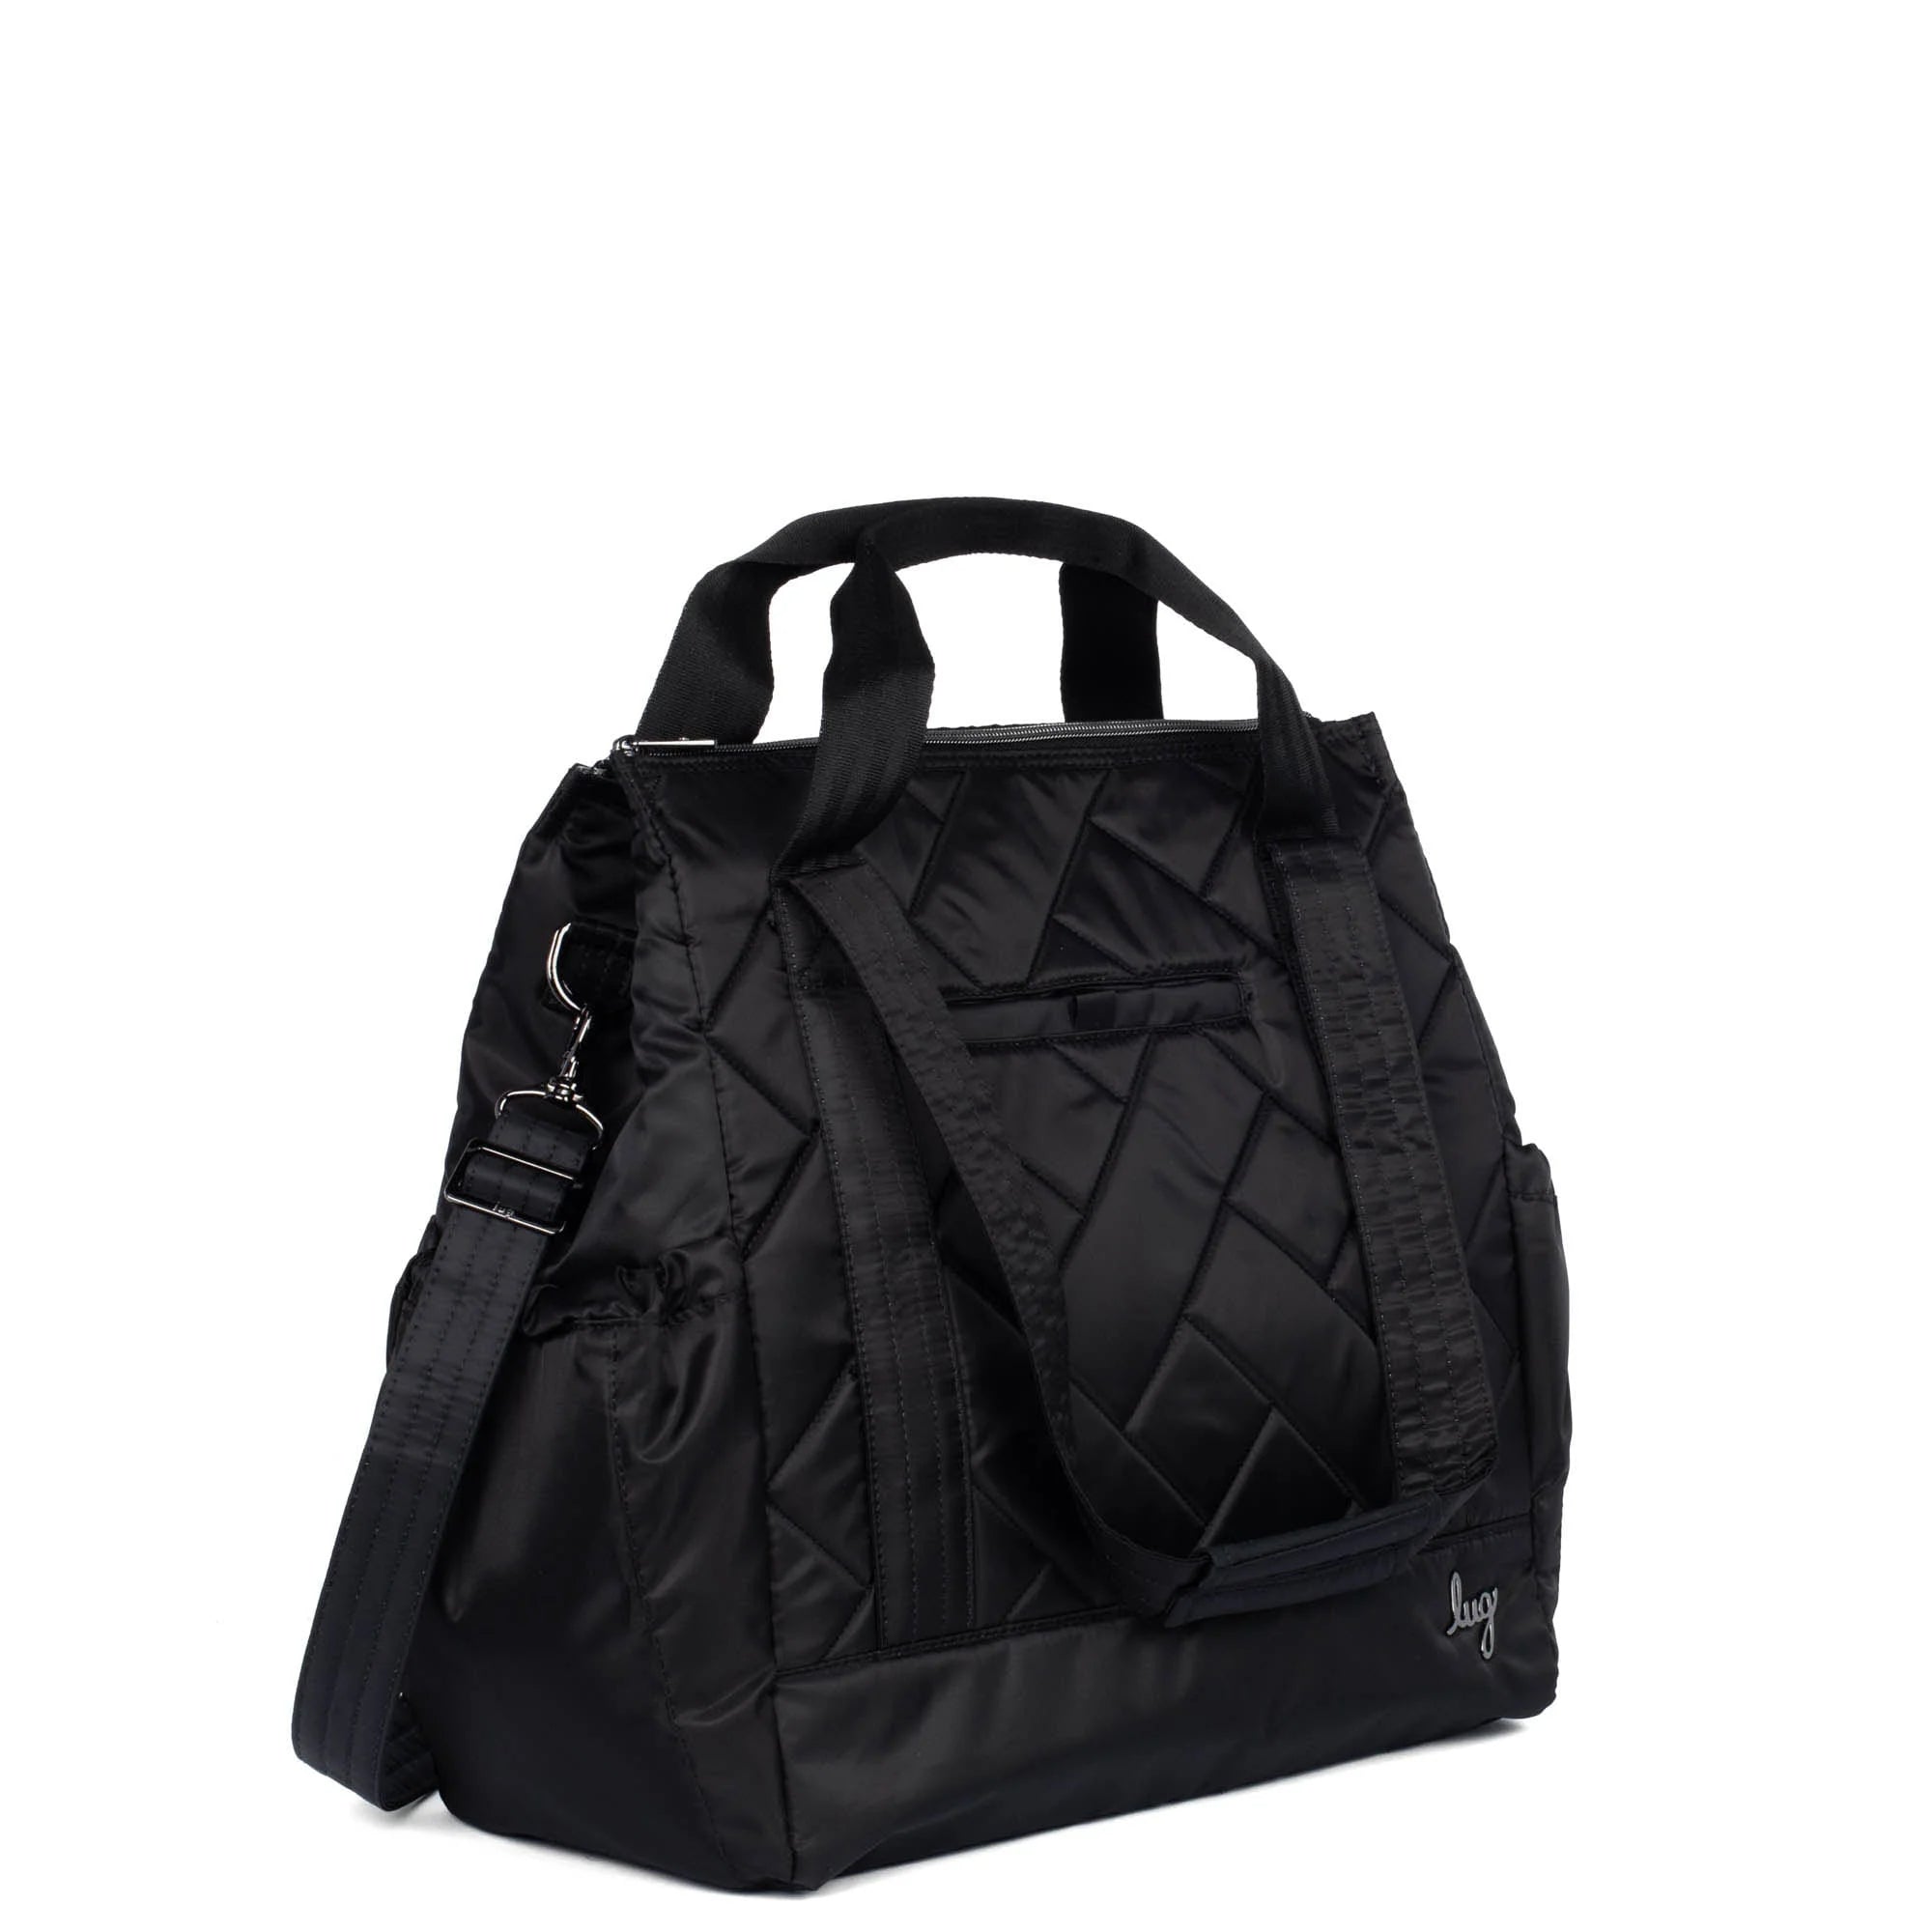 Lug Yacht Carry-All Zip-Top Tote